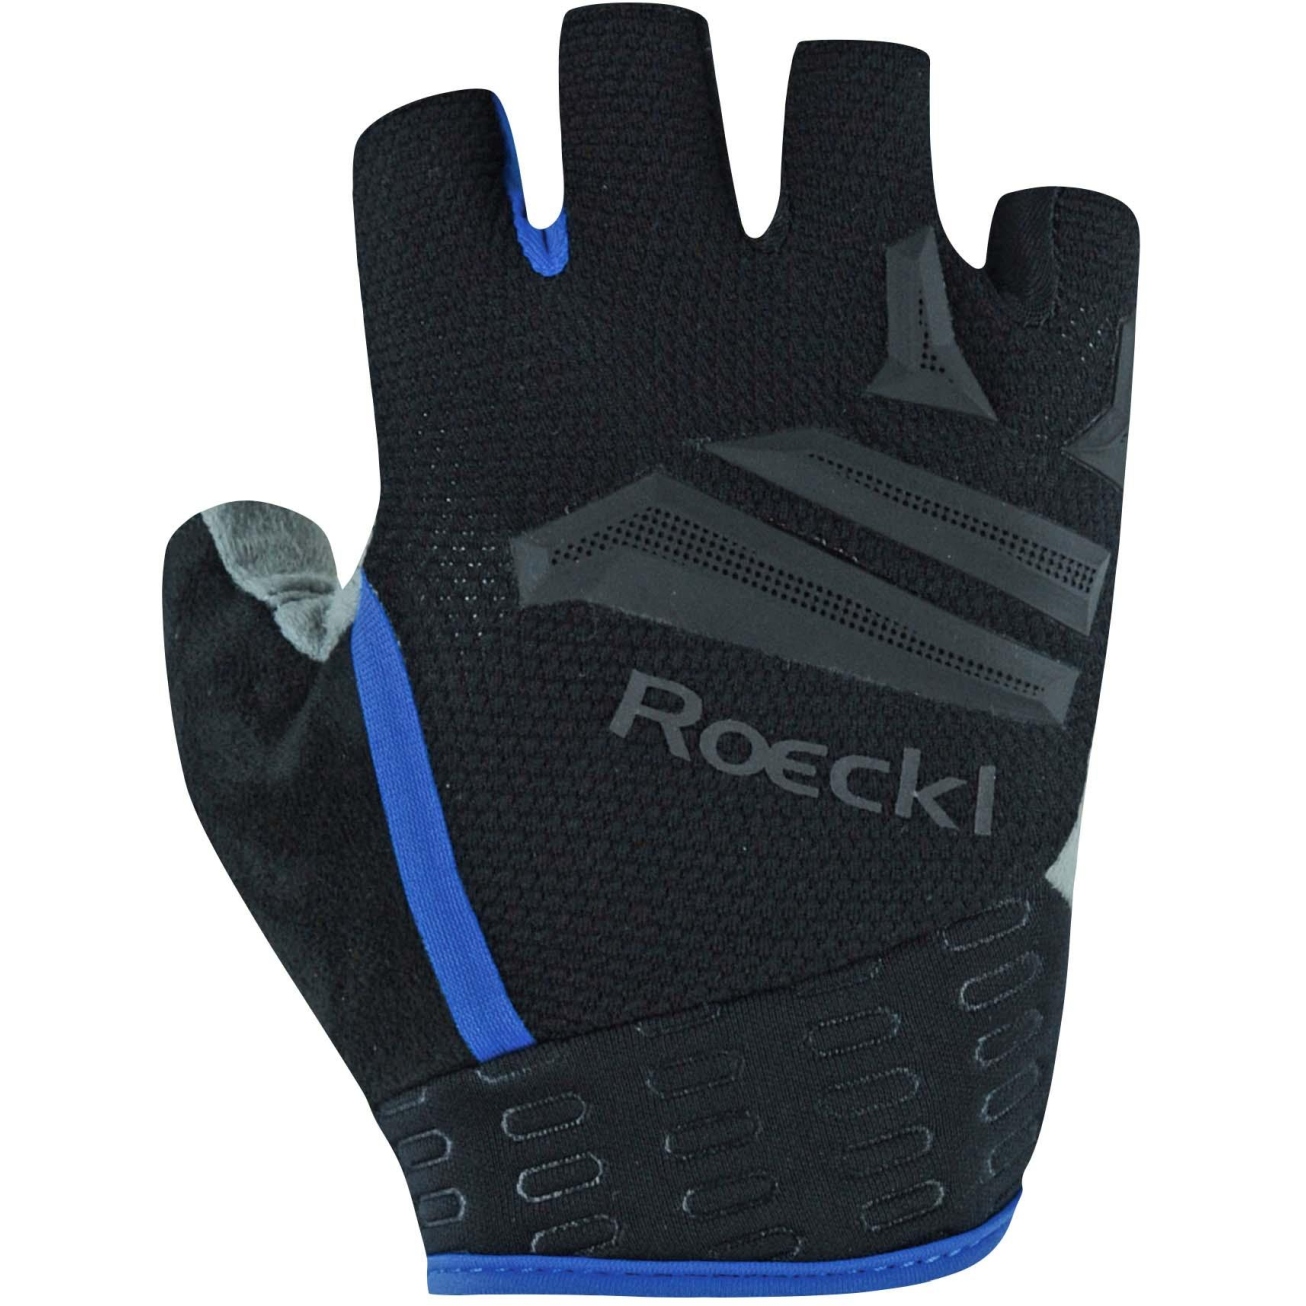 Picture of Roeckl Sports Iseler Cycling Gloves - black/dazzling blue 9511